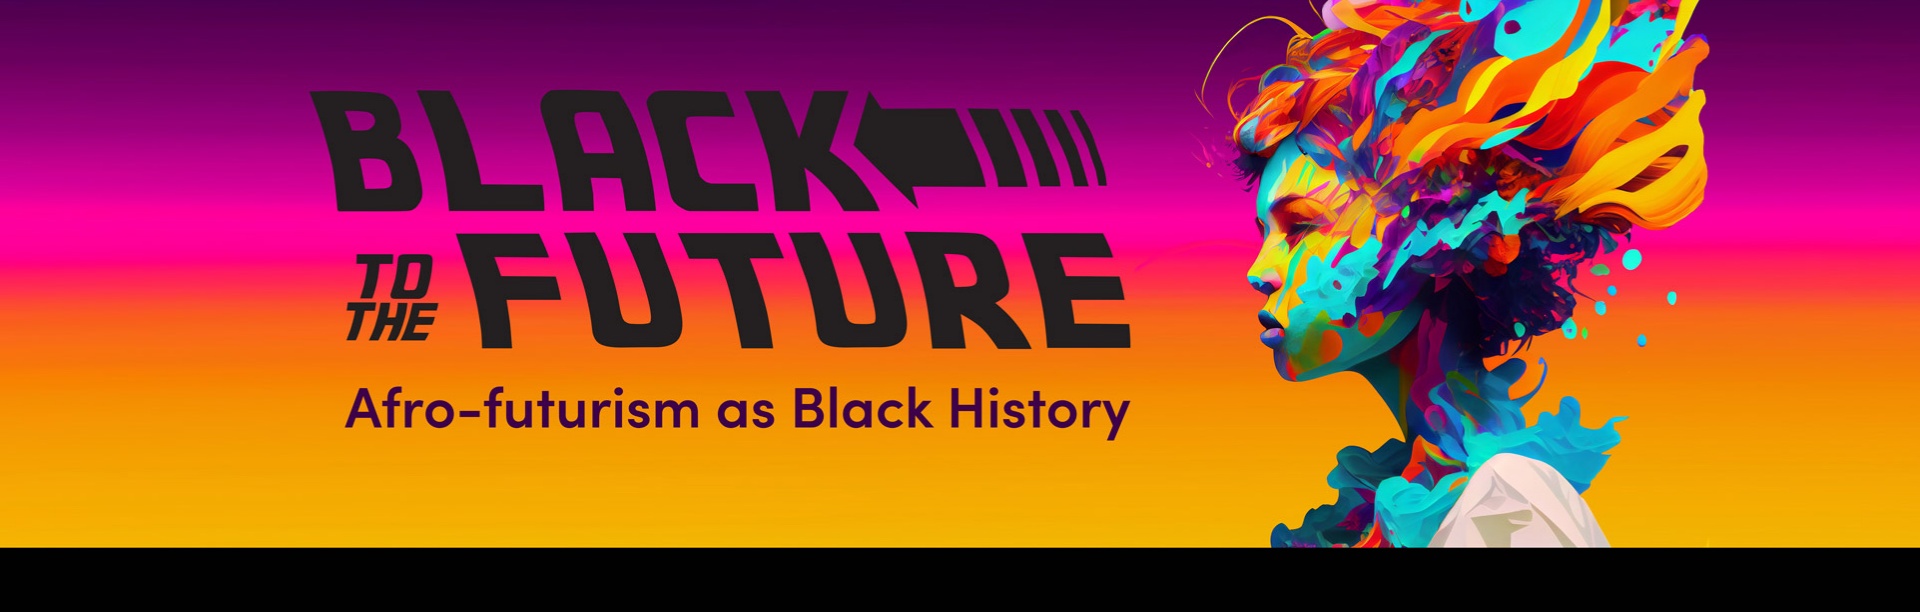 Teaching Black History conference: Black to the Future: Afro-Futurism as Black History. 